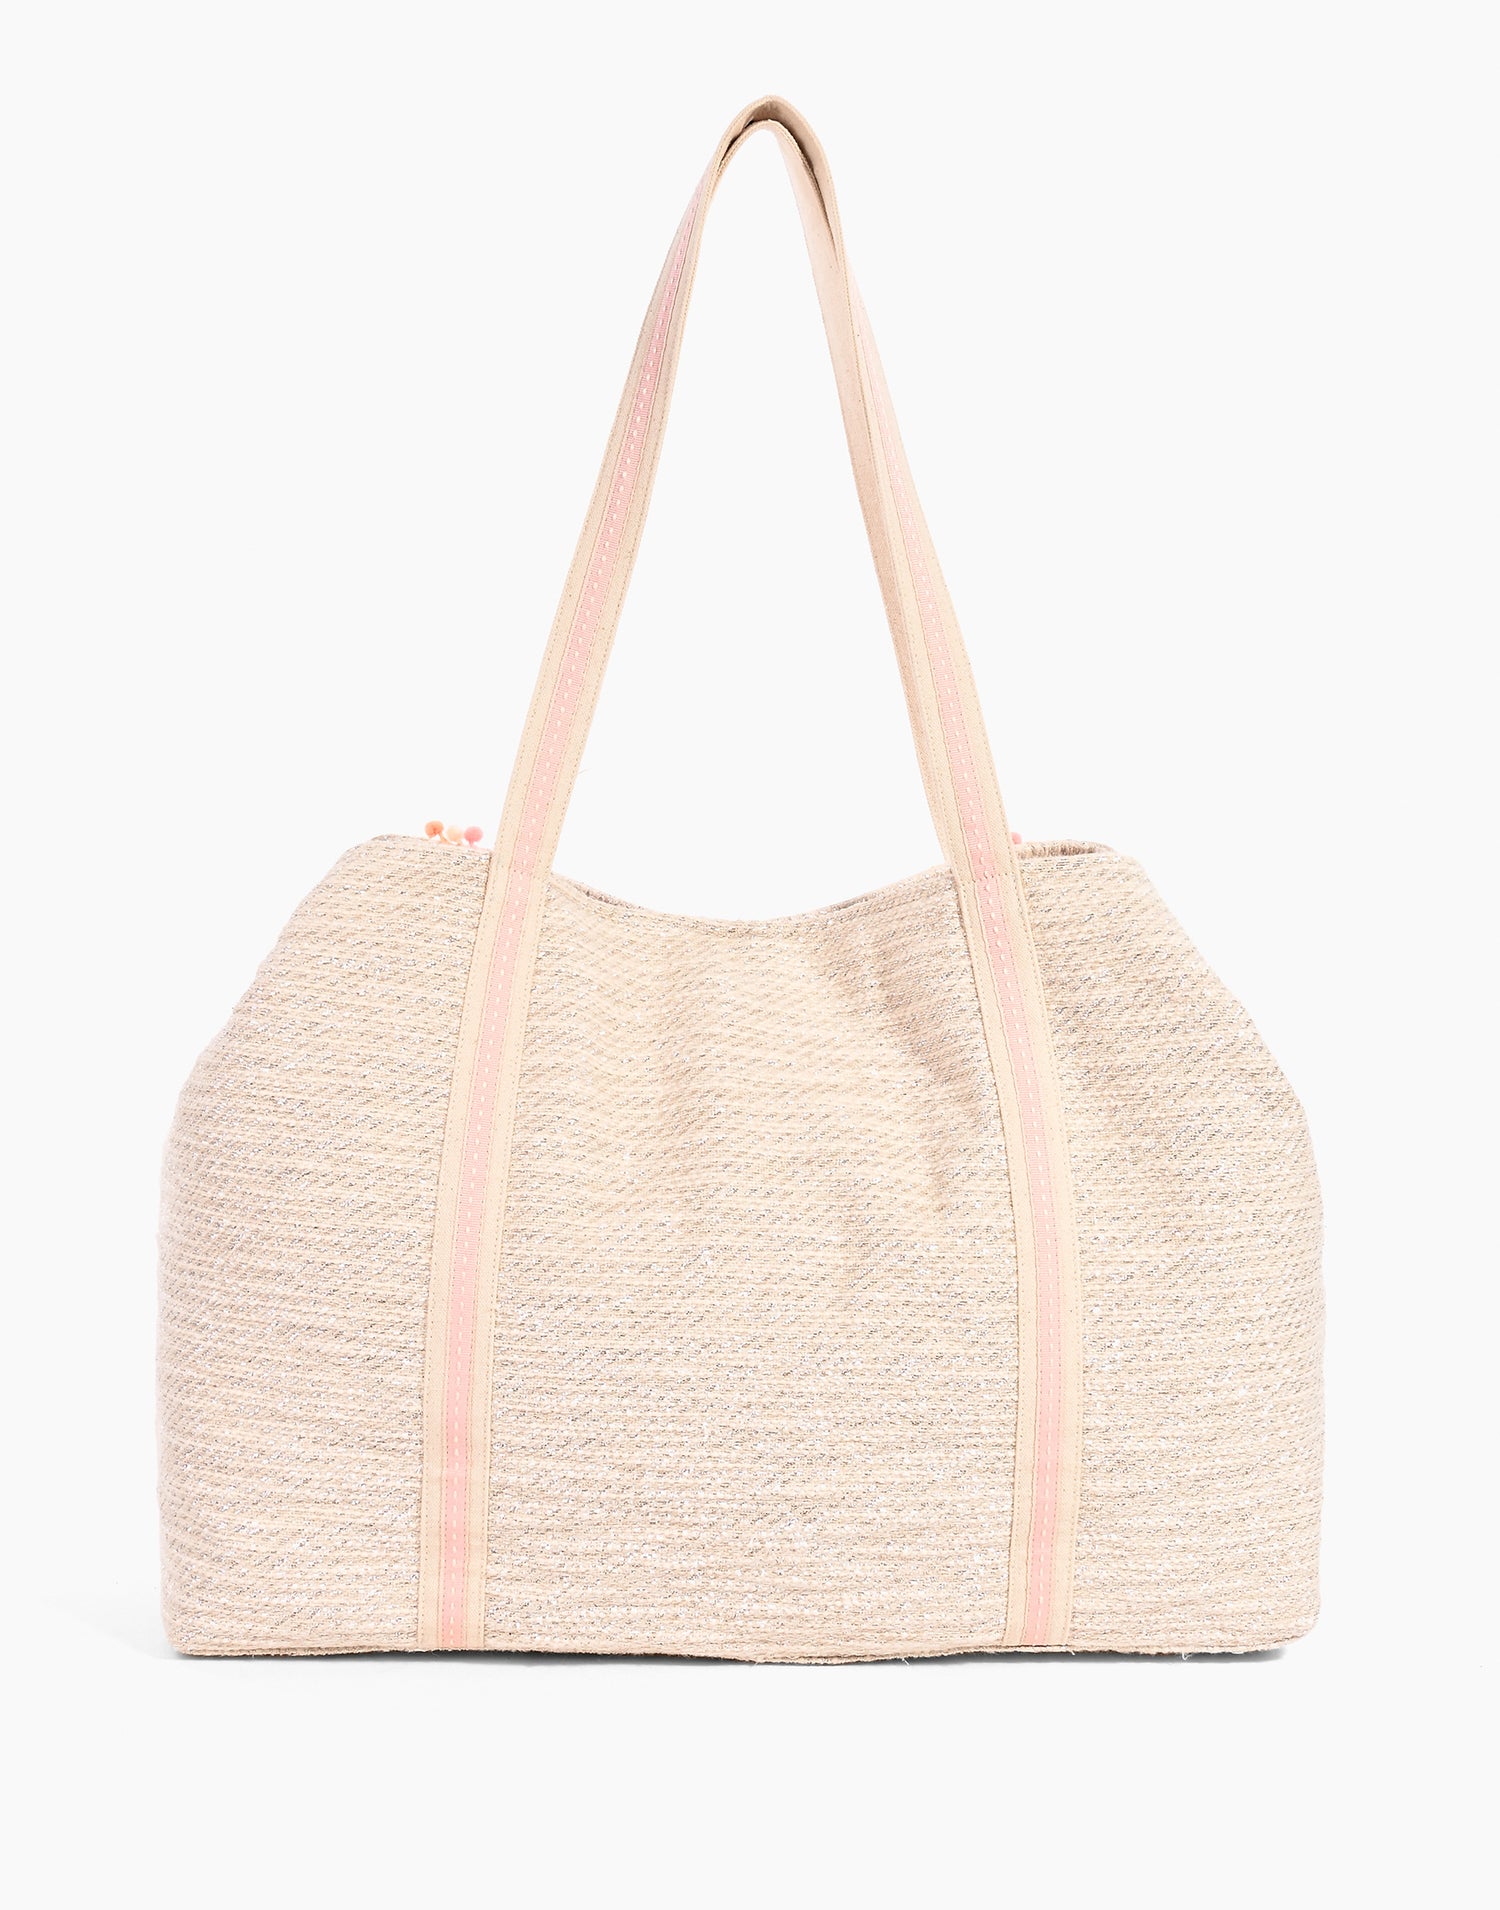 Rose All Day Tote by America & Beyond - Back View